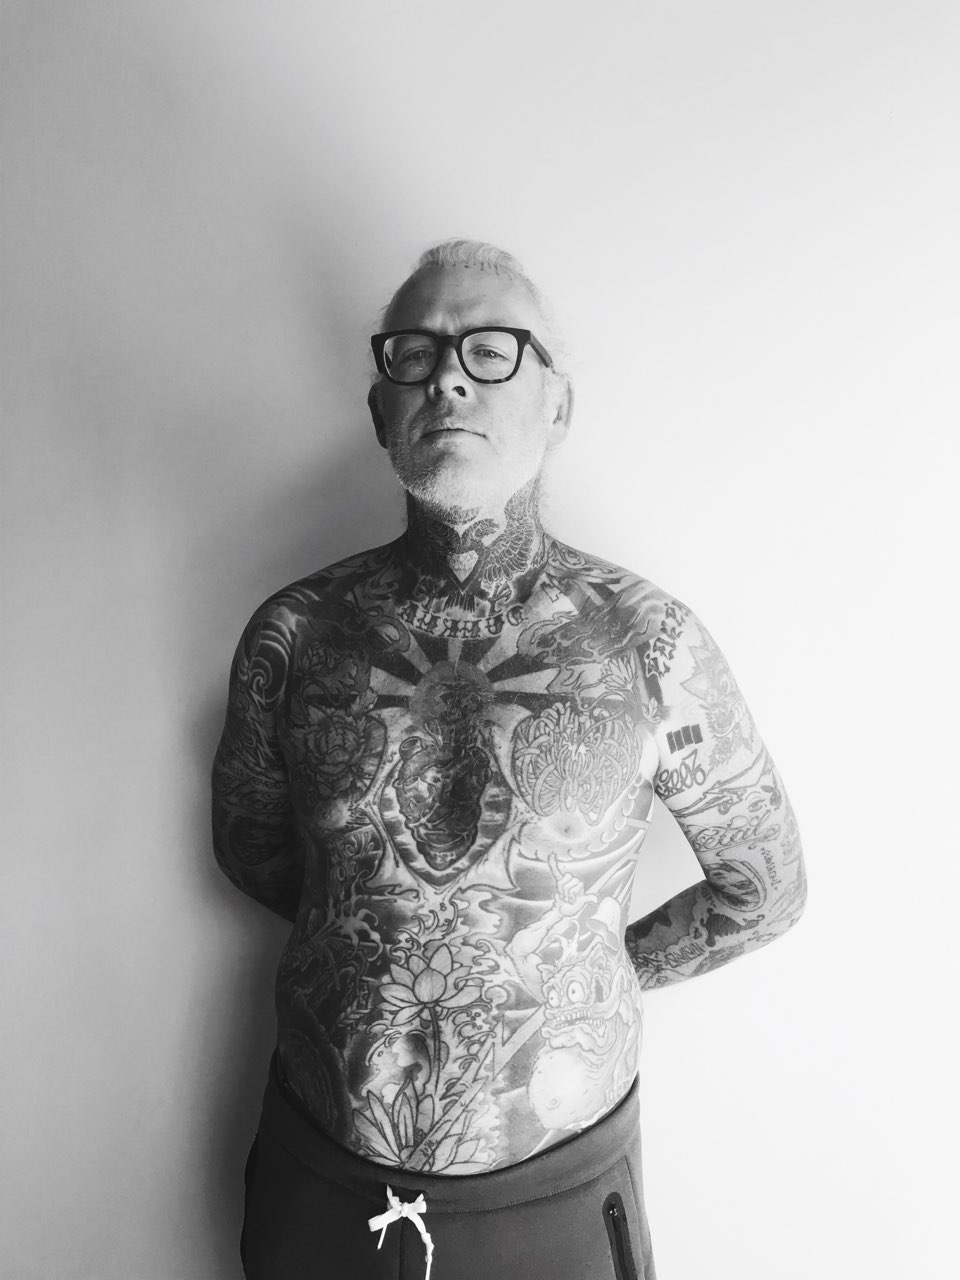 Black and white portrait of mike giant in front of a white wall. He is wearing black galsses. He is shirtless and his torso is covered in tattoos. 